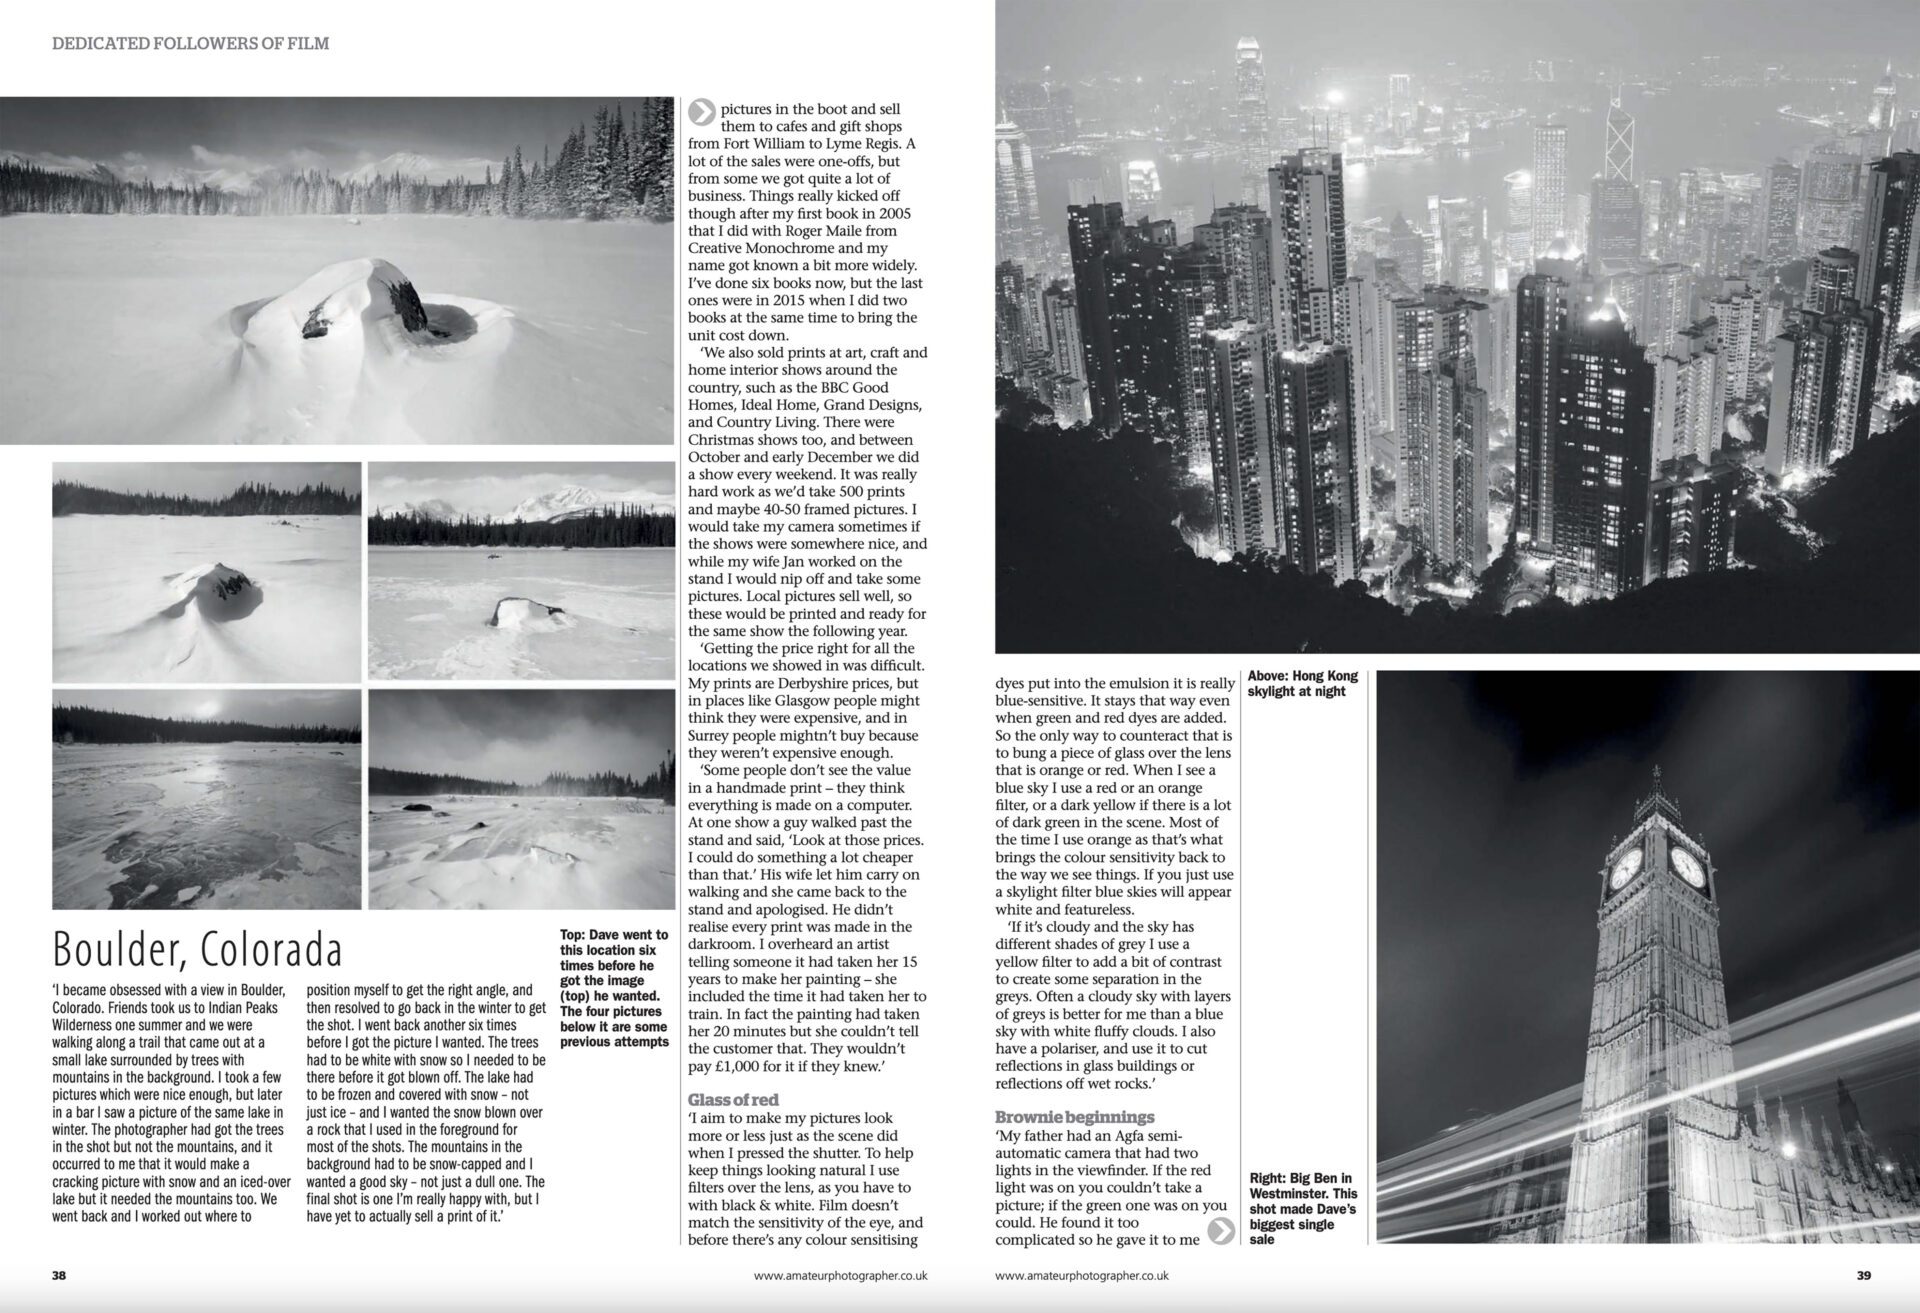 Article on Dave Butcher in Amateur Photographer magazine March 2022